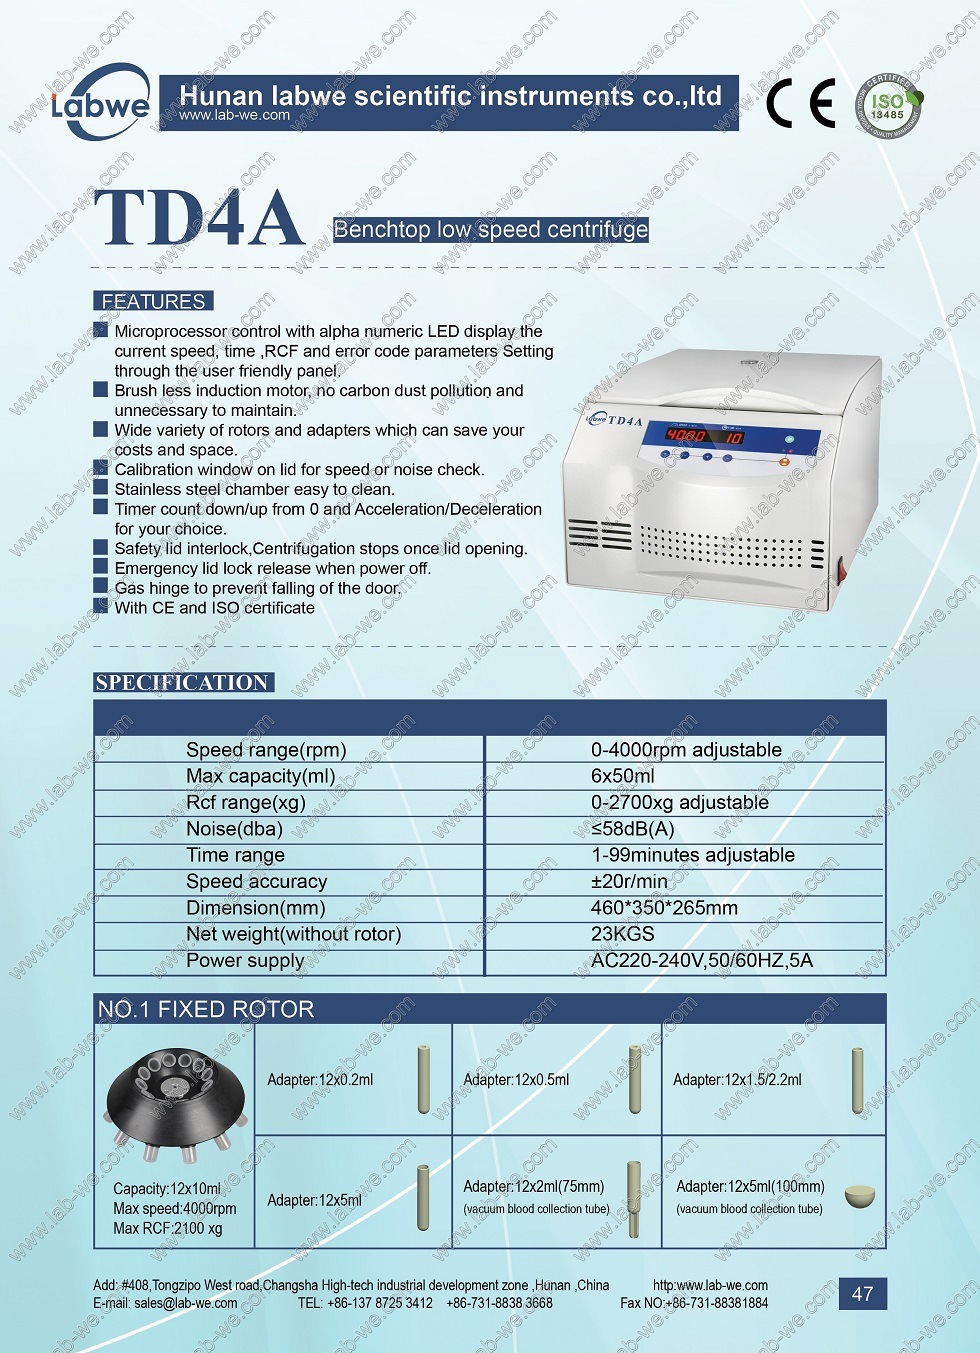 Benchtop Low Speed Clinical and Laboratory Centrifuge Td4a